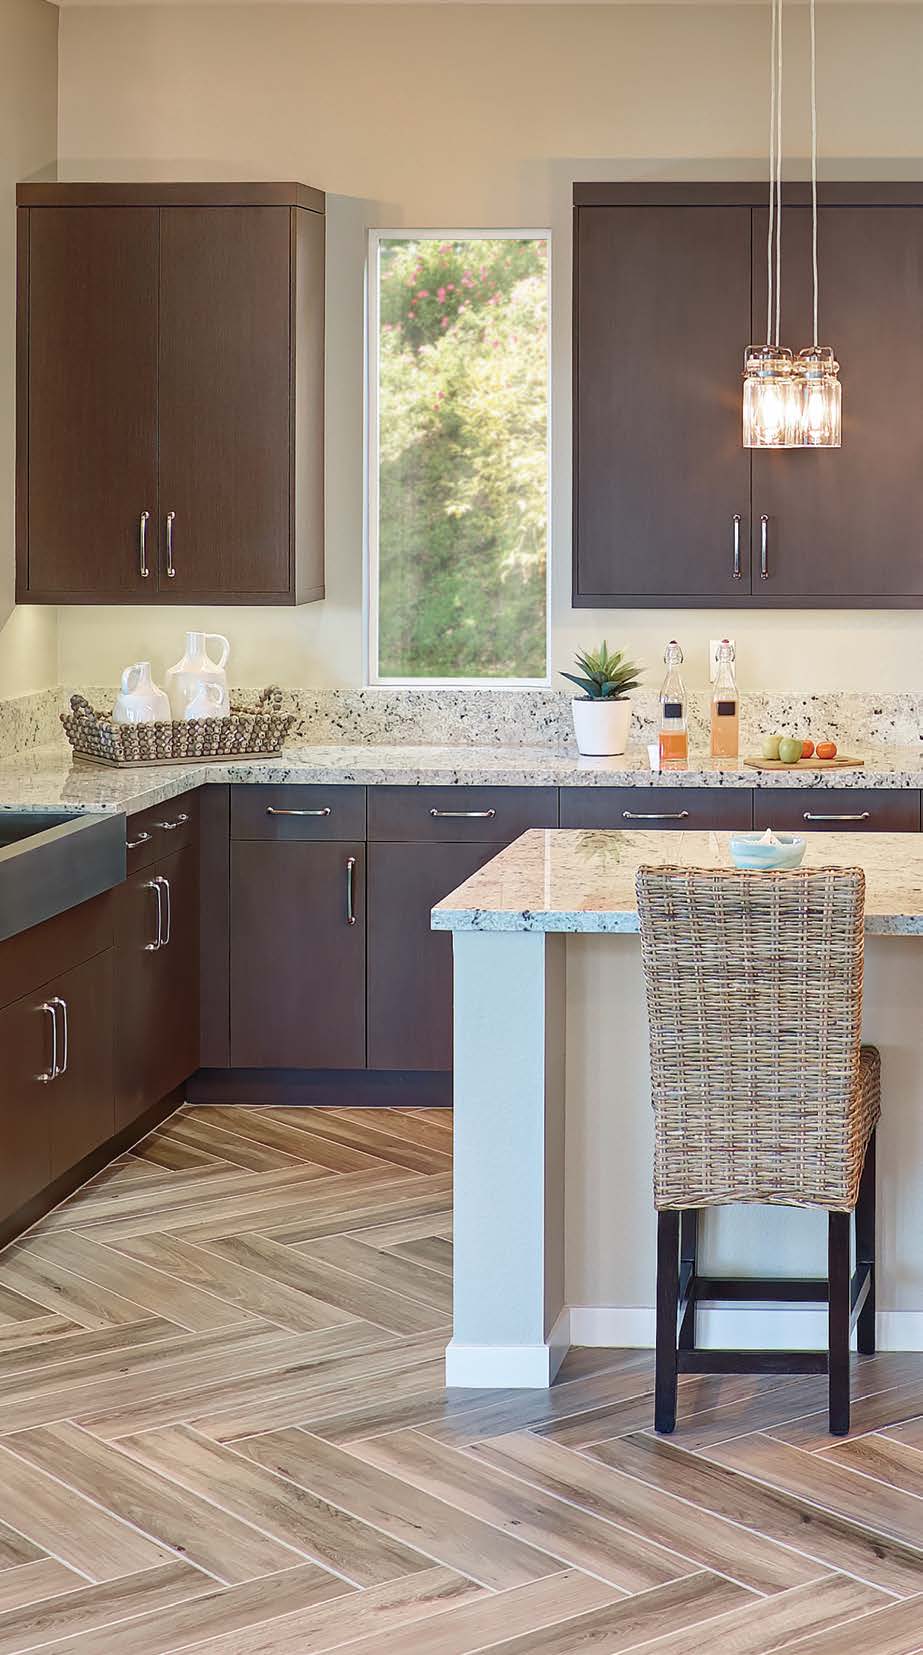 Angled Vista wooden kitchen cabinets with hardwood flooring